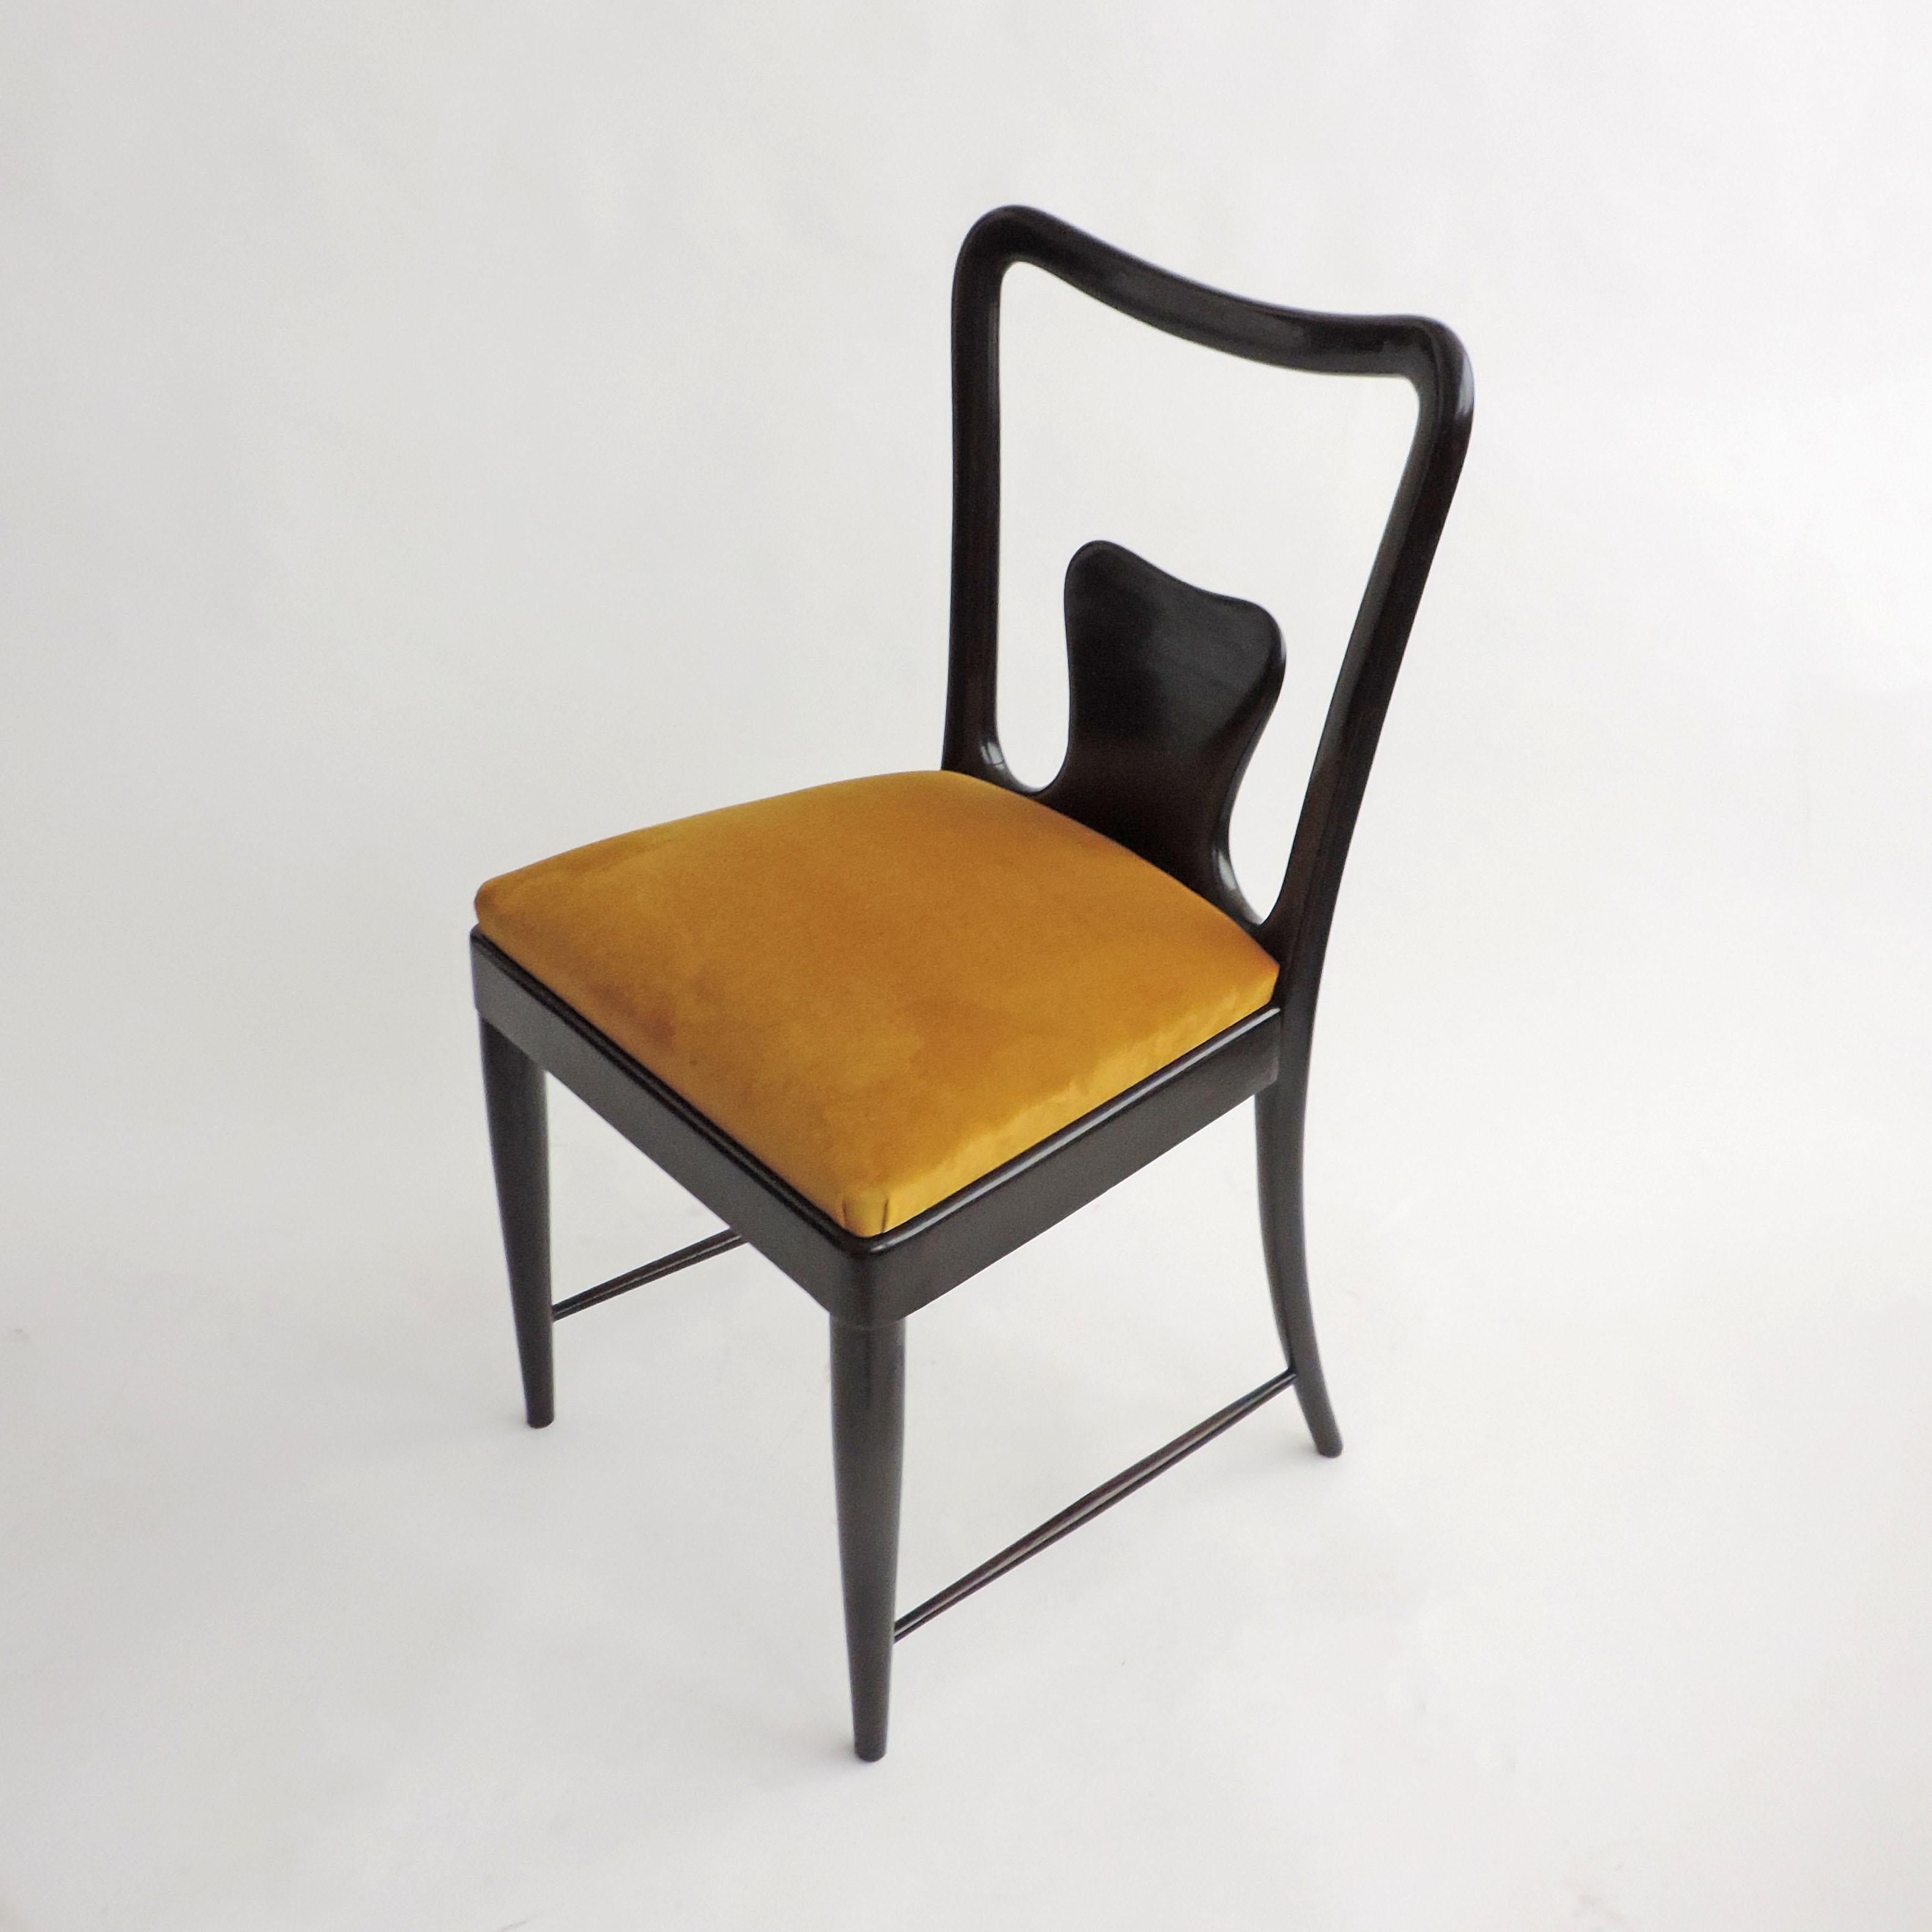 Stained Guglielmo Ulrich Set of Six Dining Chairs, Italy, 1940s For Sale